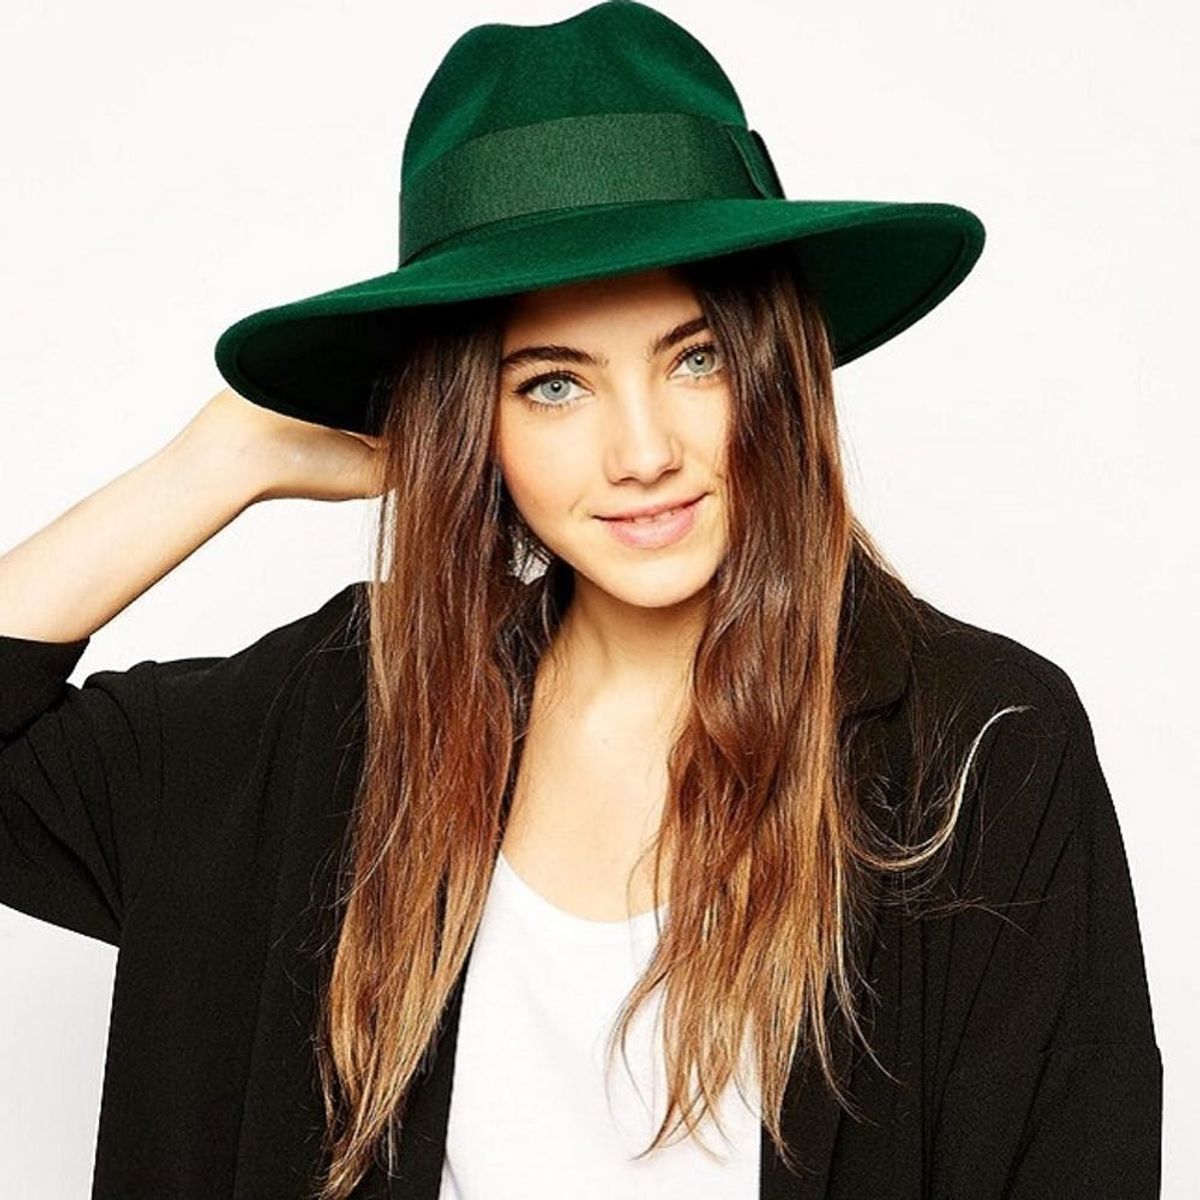 15 Stylish Ways to Wear Green on St. Paddy’s Day